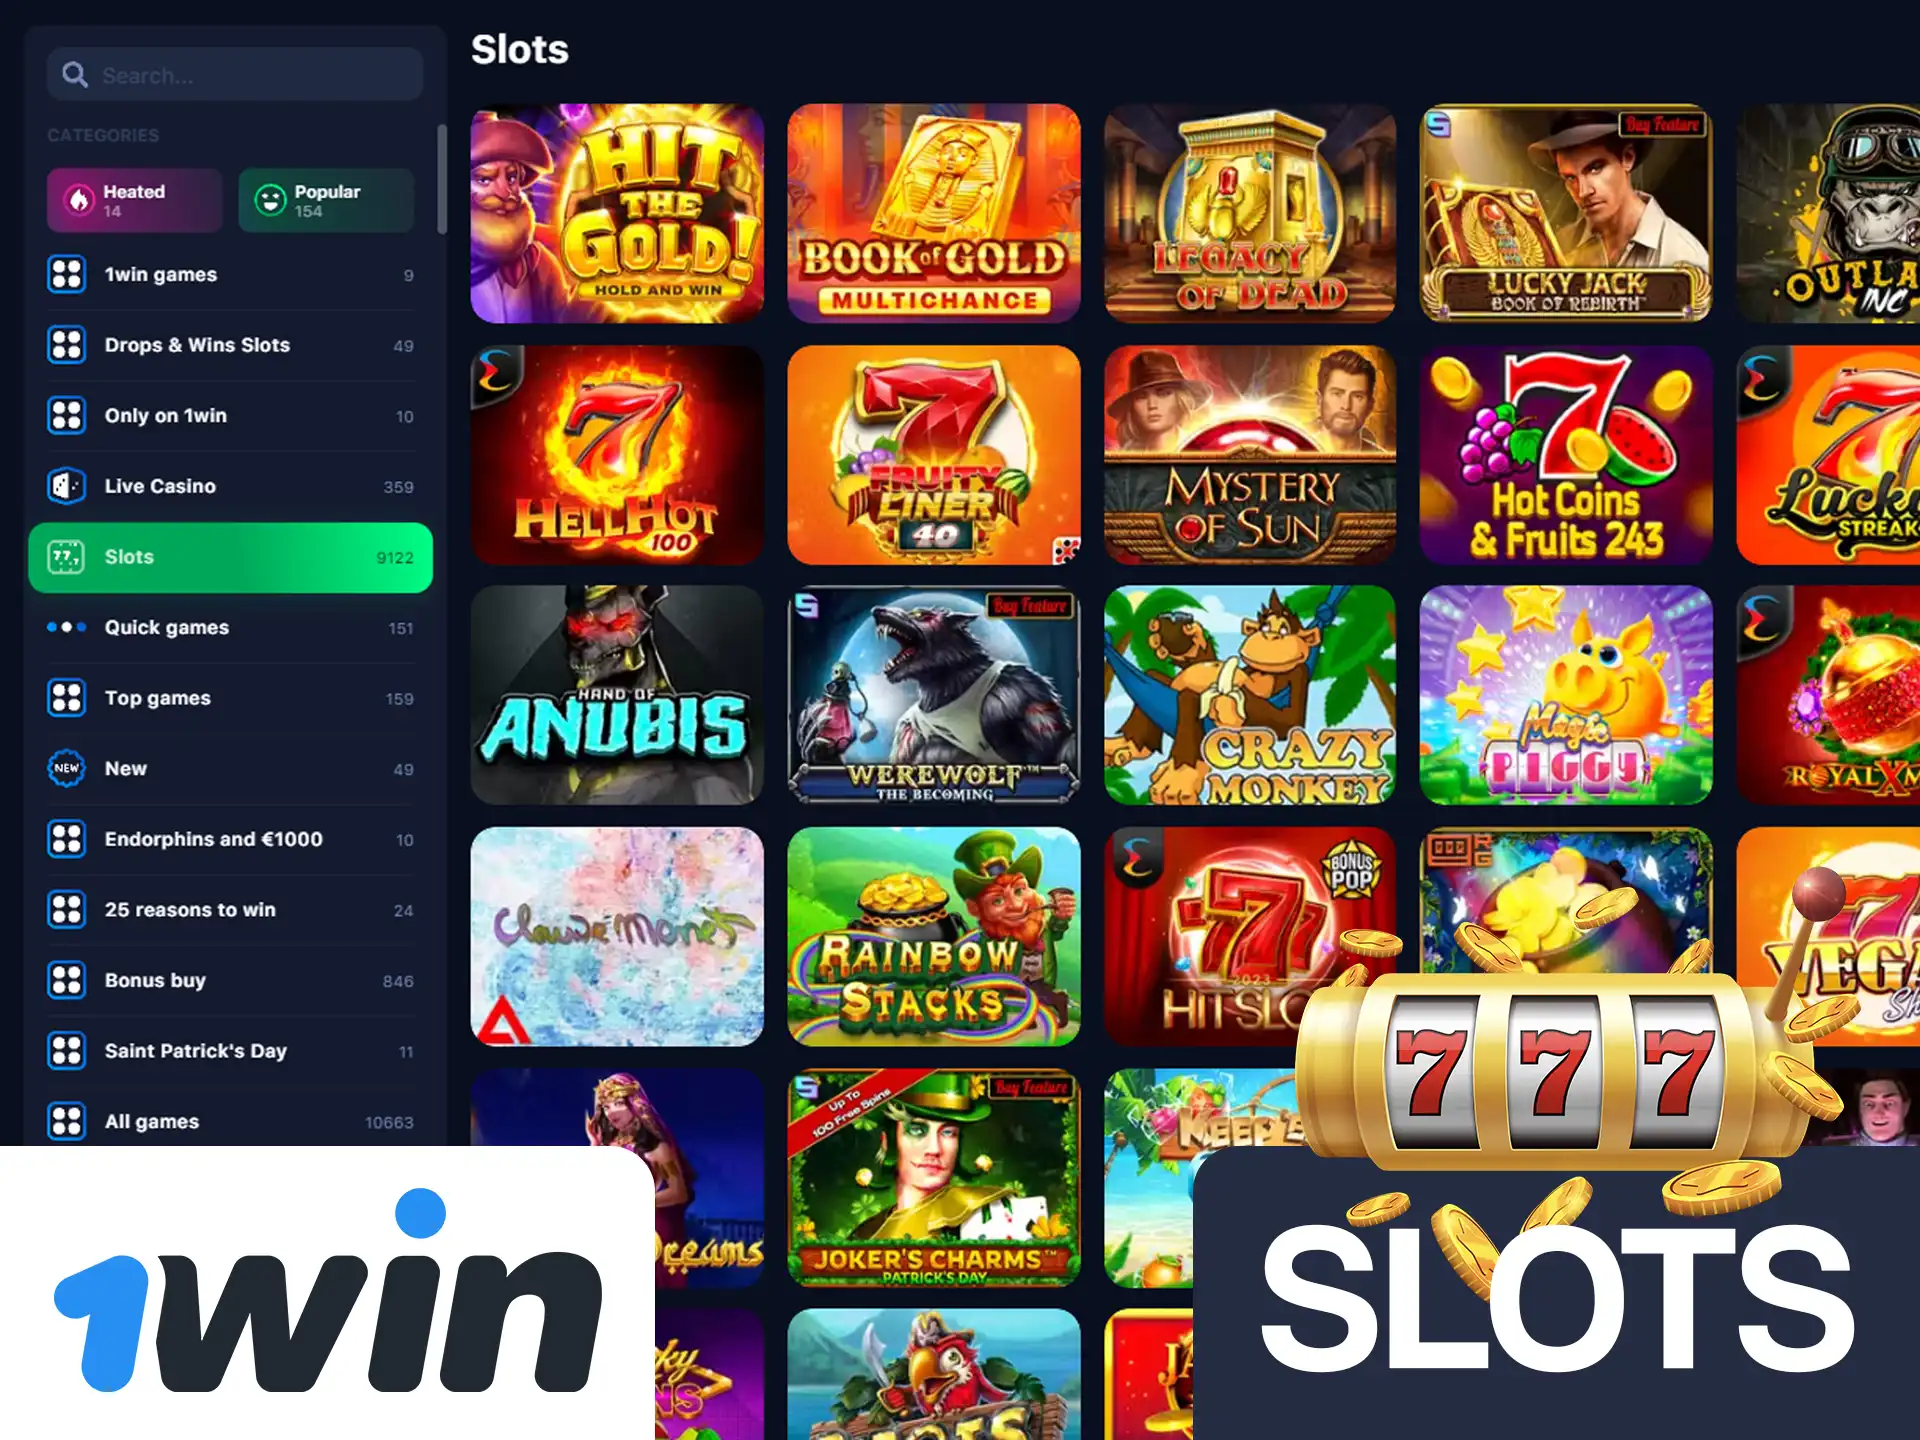 Search for your favourite slots to play at 1win.